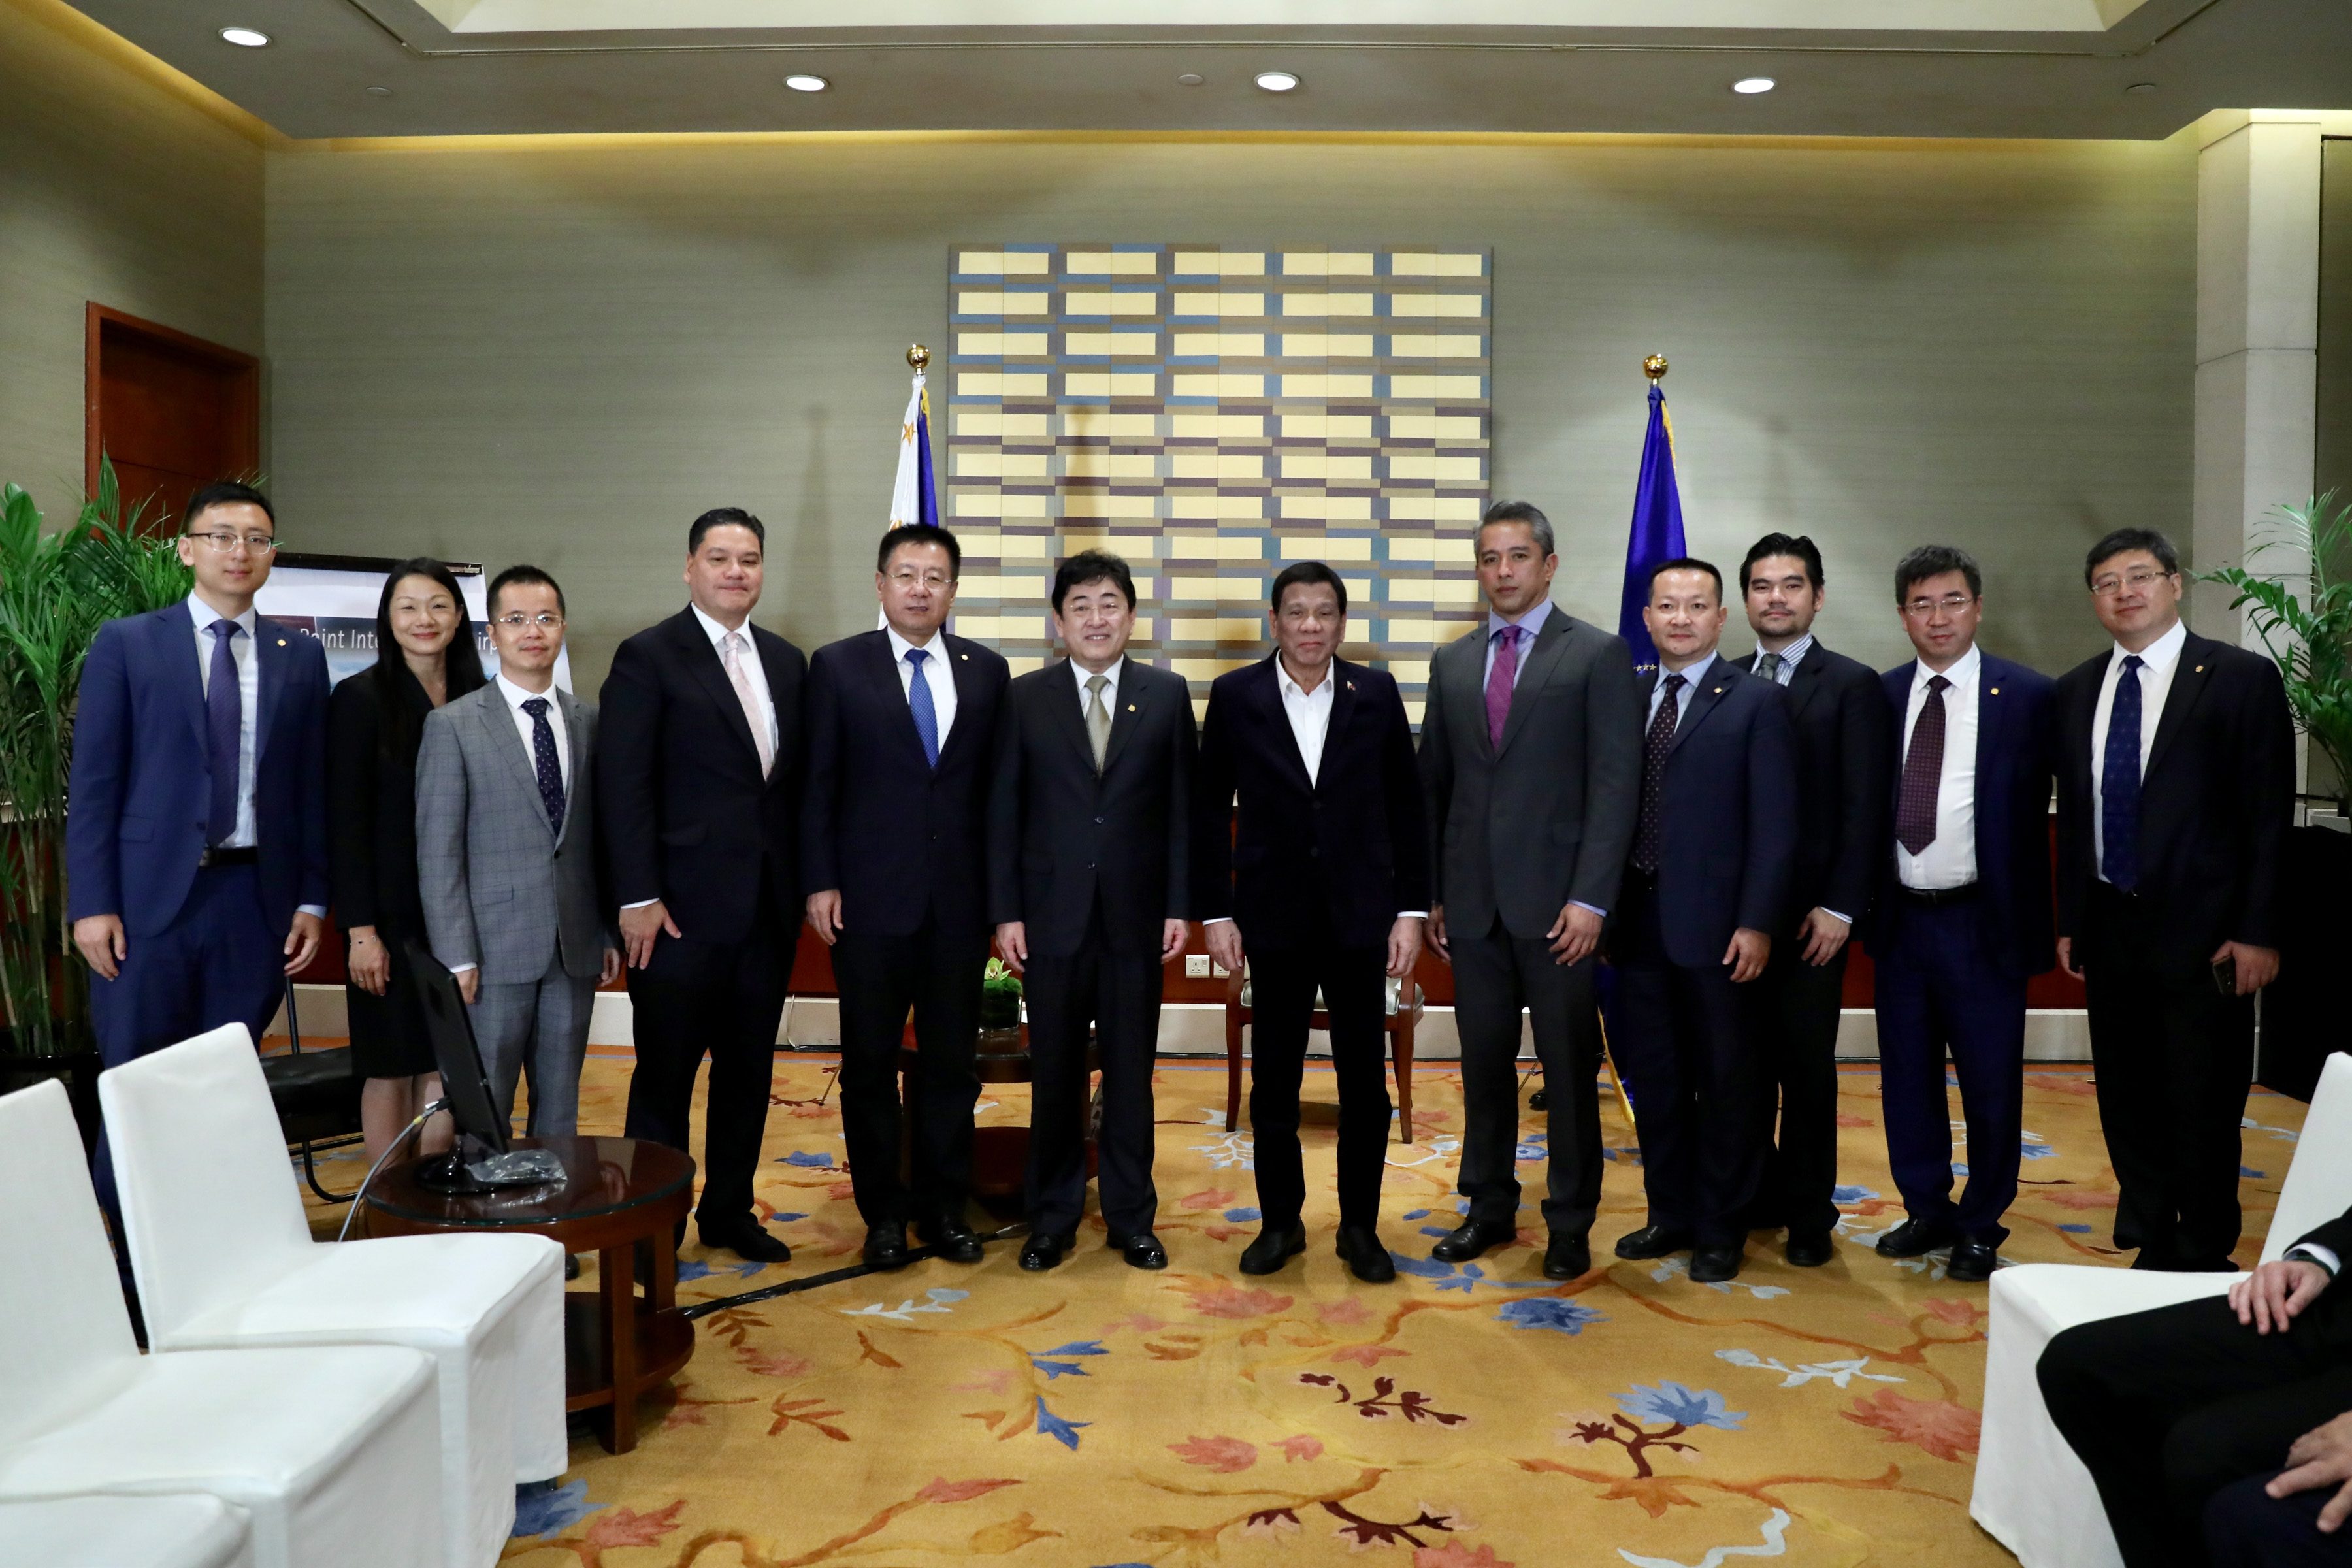 PARTNERS. President Rodrigo Duterte grants a photo opportunity to Cavite Governor Juanito Victor Remulla Jr. and officials of CAVITEX Holdings, China Communication Construction Company, and China Airport Construction Group. Malacañang photo 